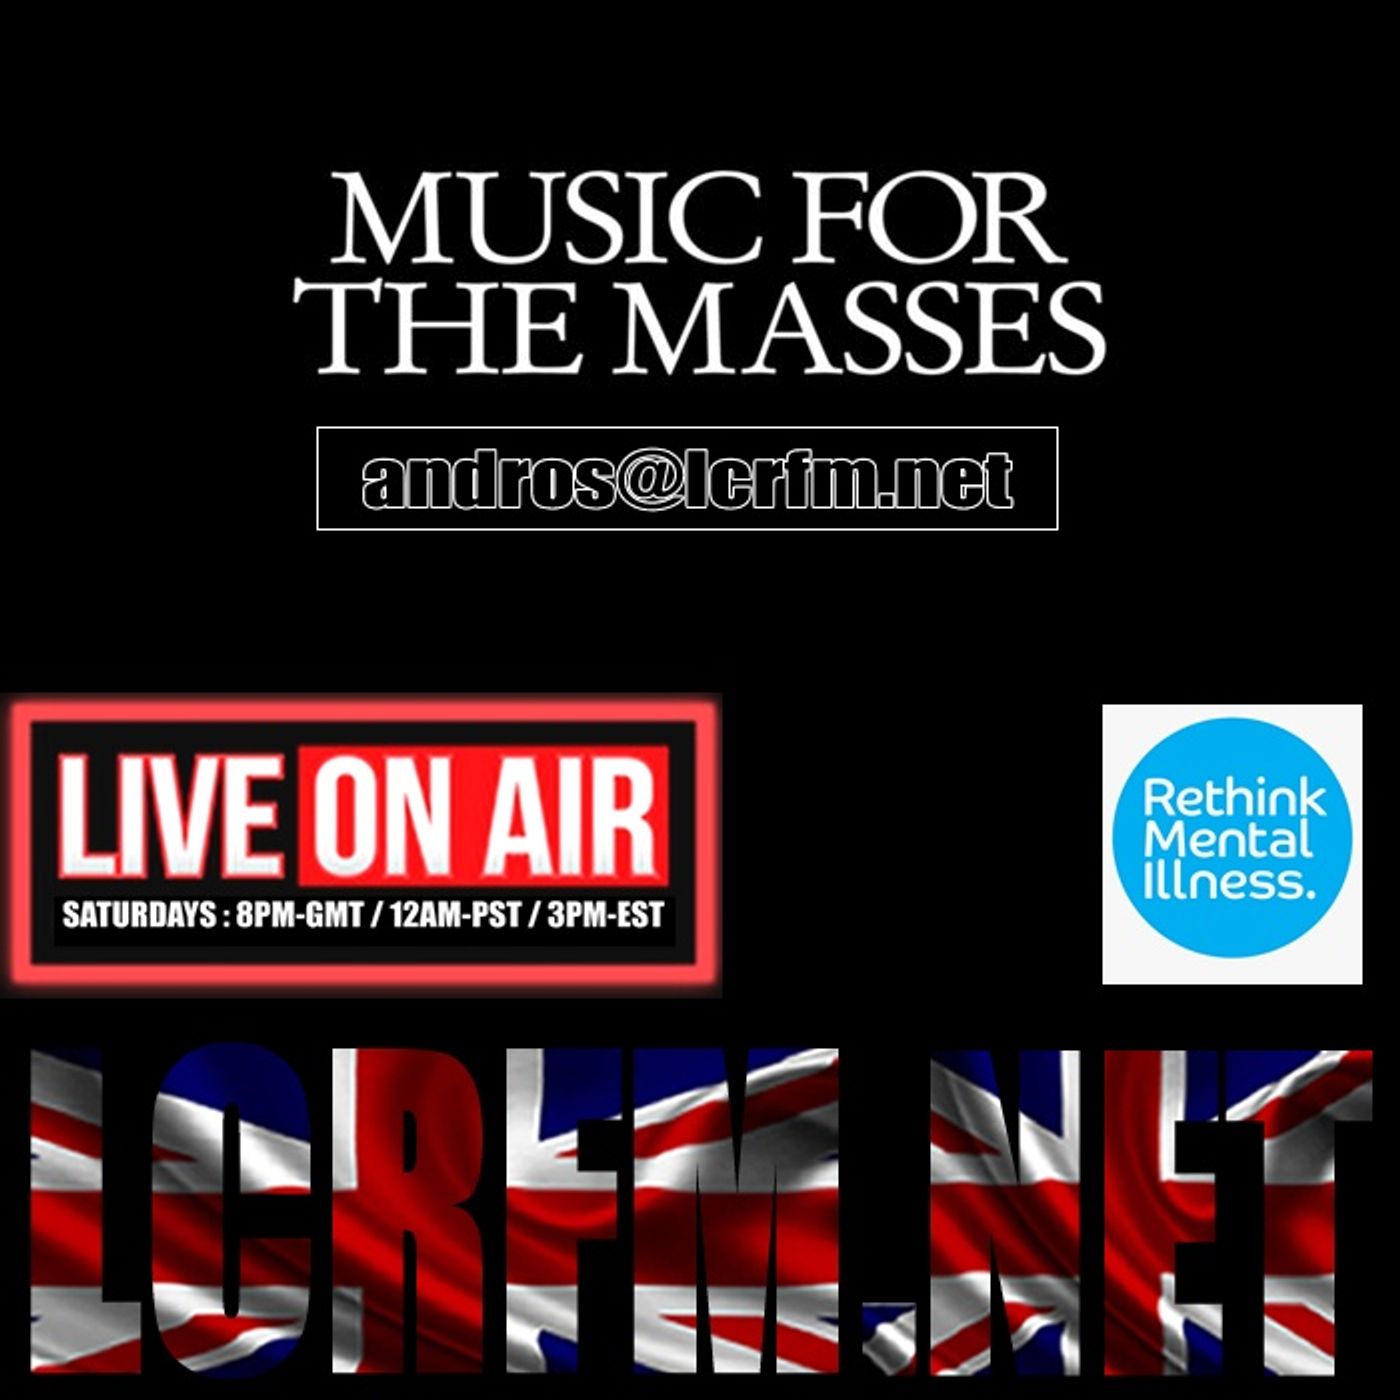 Saturday Oct 8 on LCRFM ... "Music for the Masses"... LIVE FROM LONDON" LCRFM